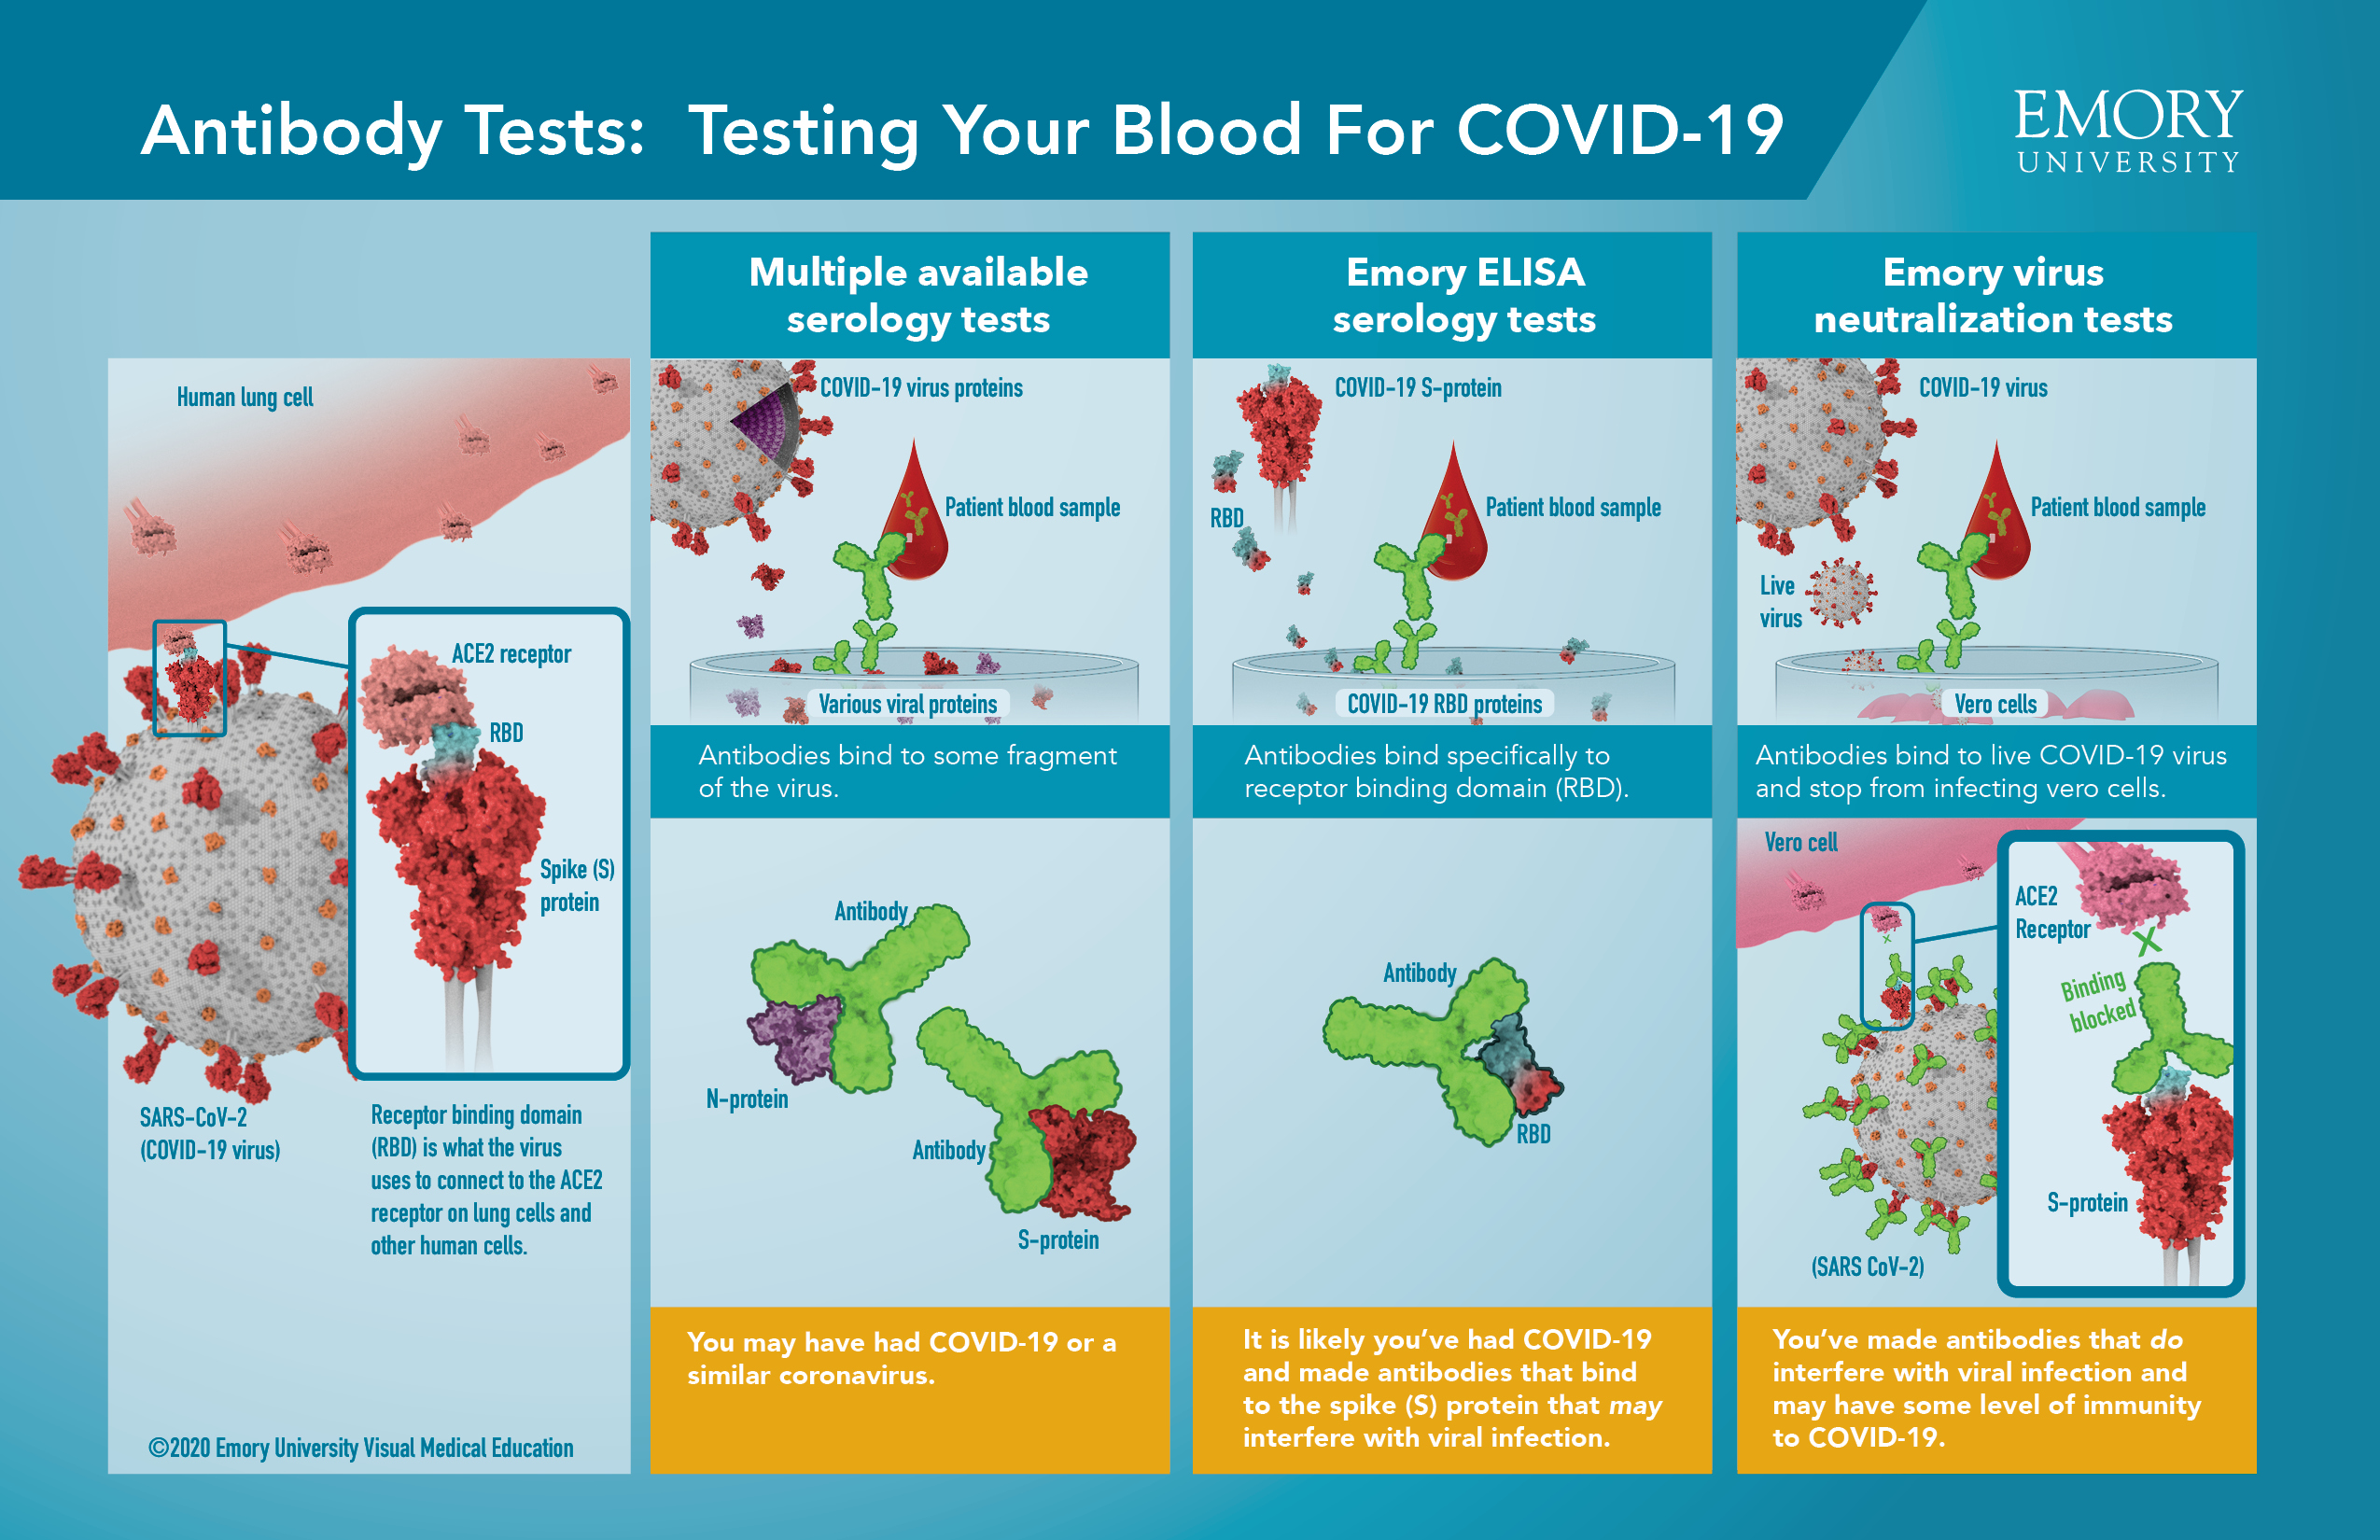 "Antibody Tests: Testing Your Blood for COVID-19". Series of illustrations depicting COVID-19 antibody testing.